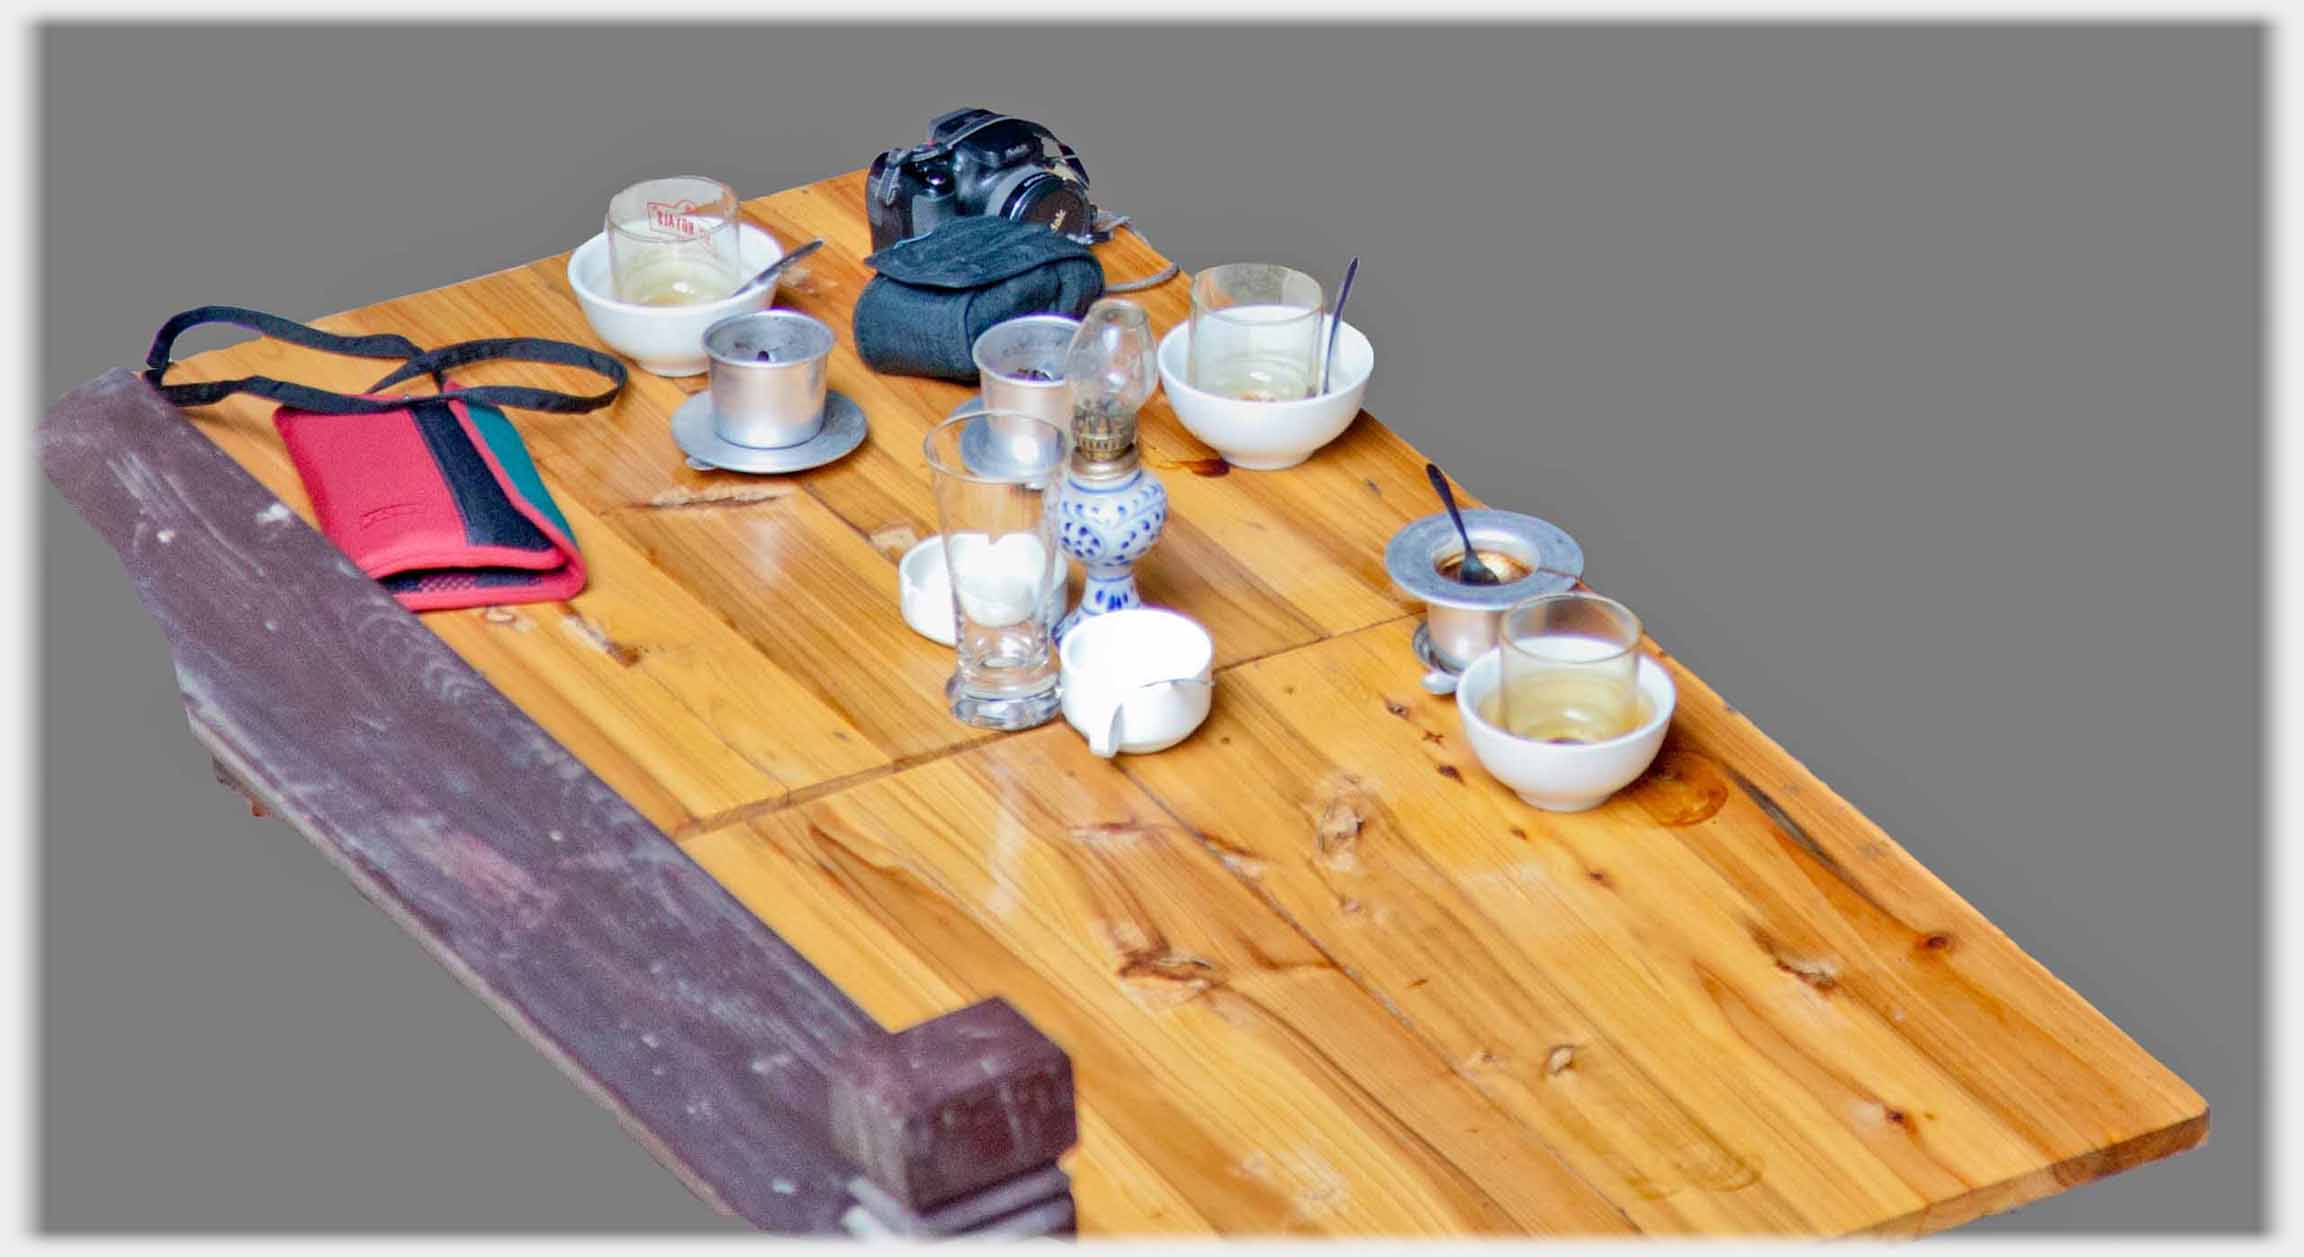 Clean wood table top with coffee filters for three, glasses, camera, purse and lamp.